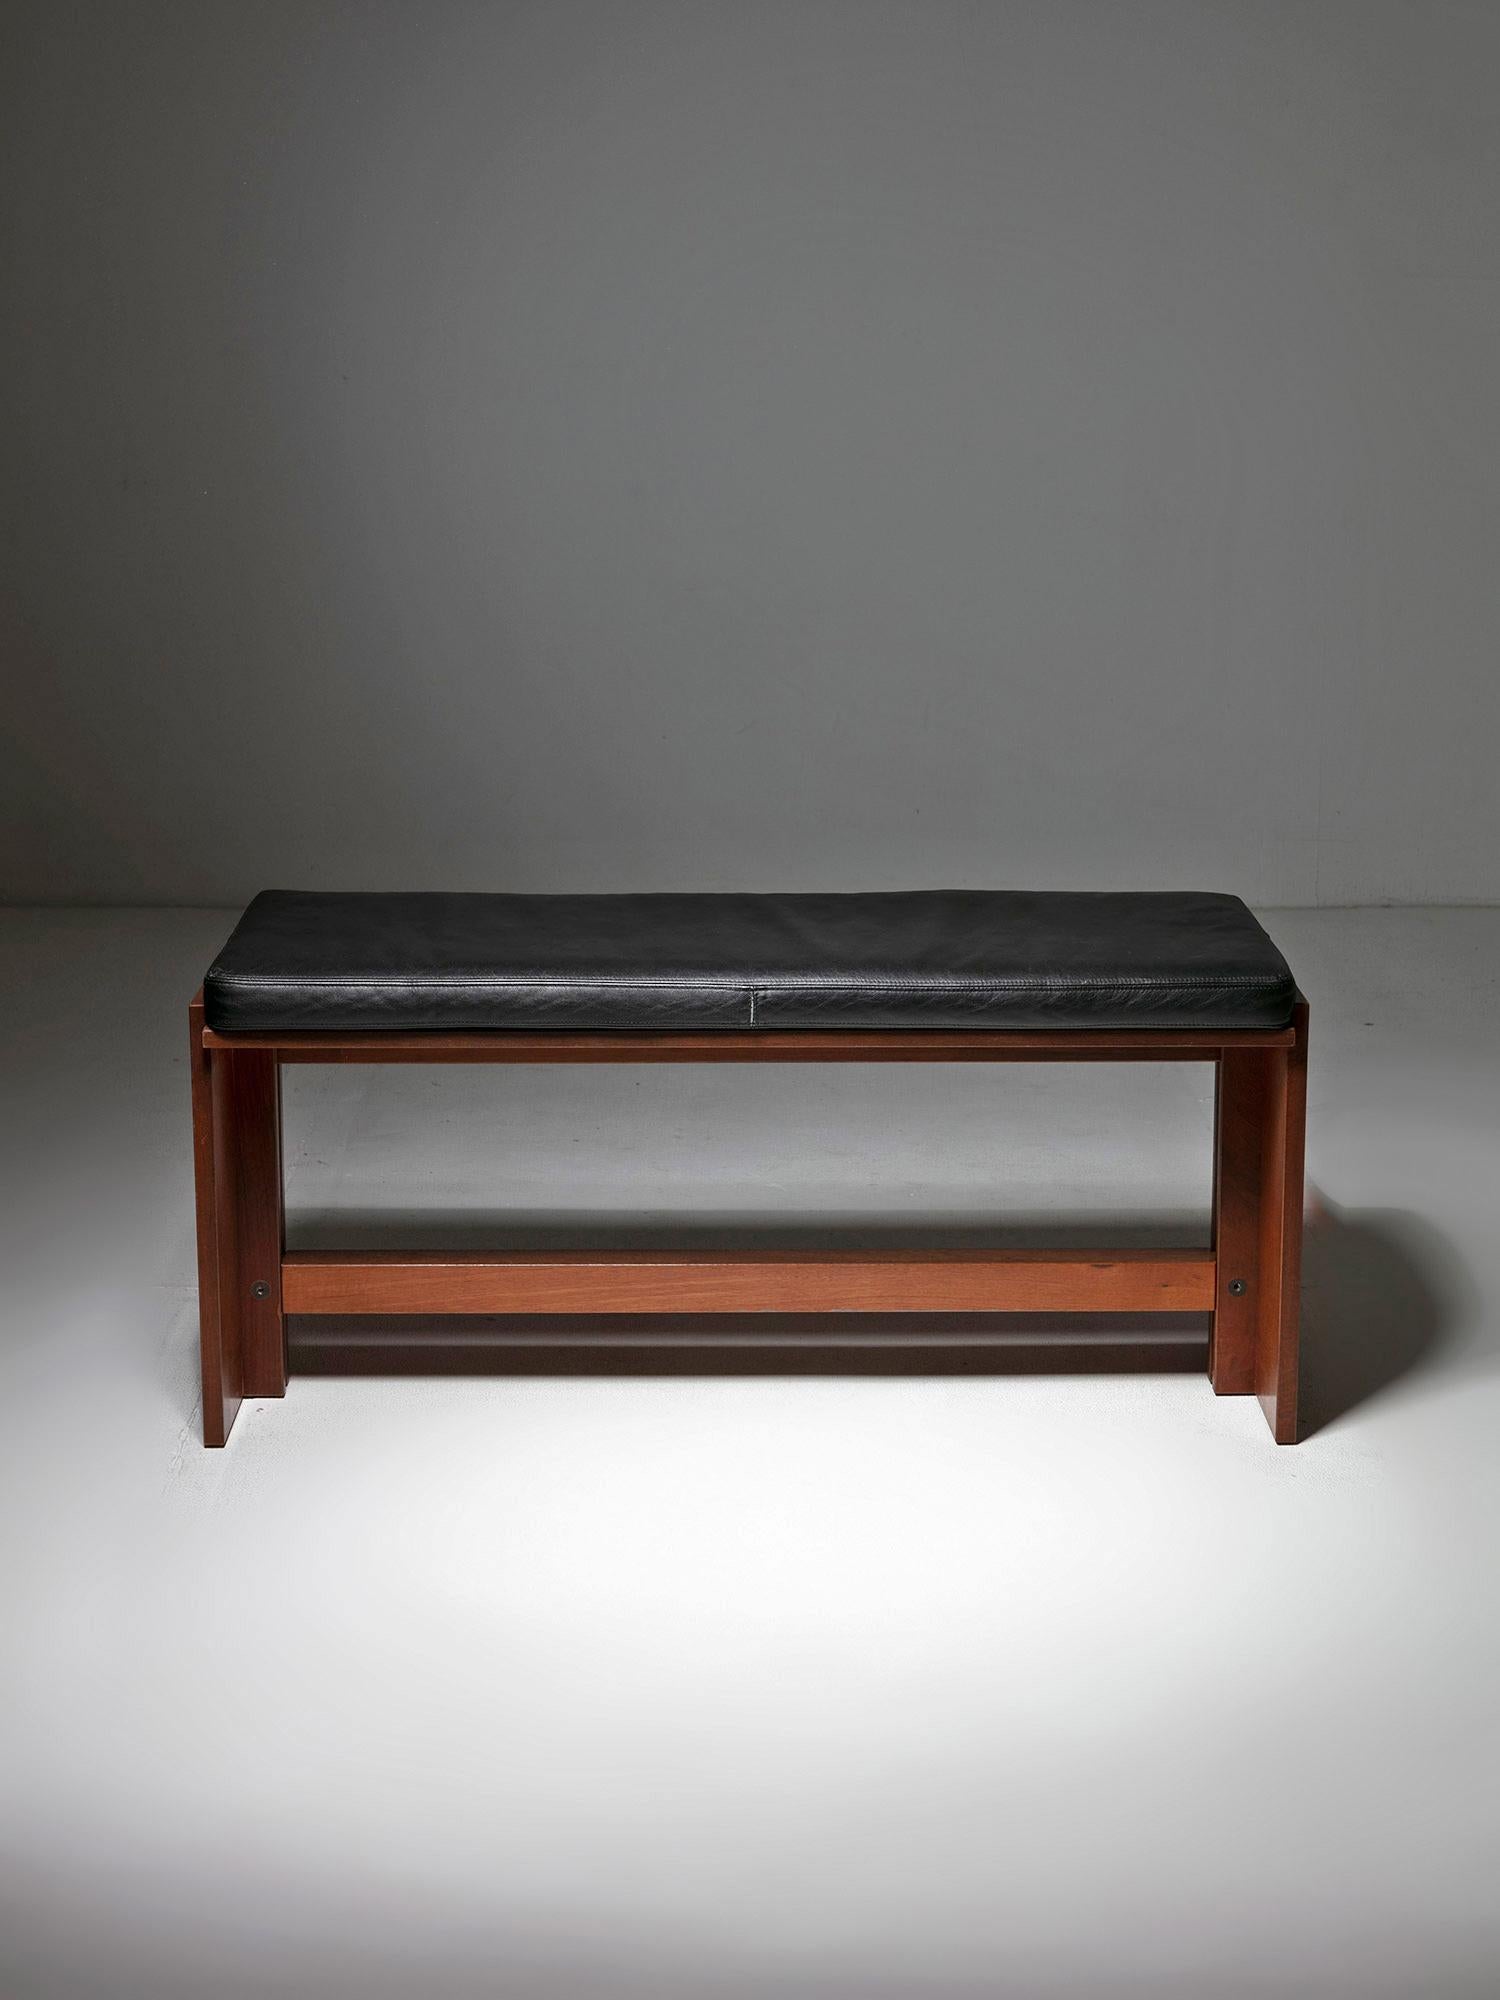 Italian Walnut and Leather Bench Model 662 by A. Vigilio for Bernini, Italy, 1980s For Sale